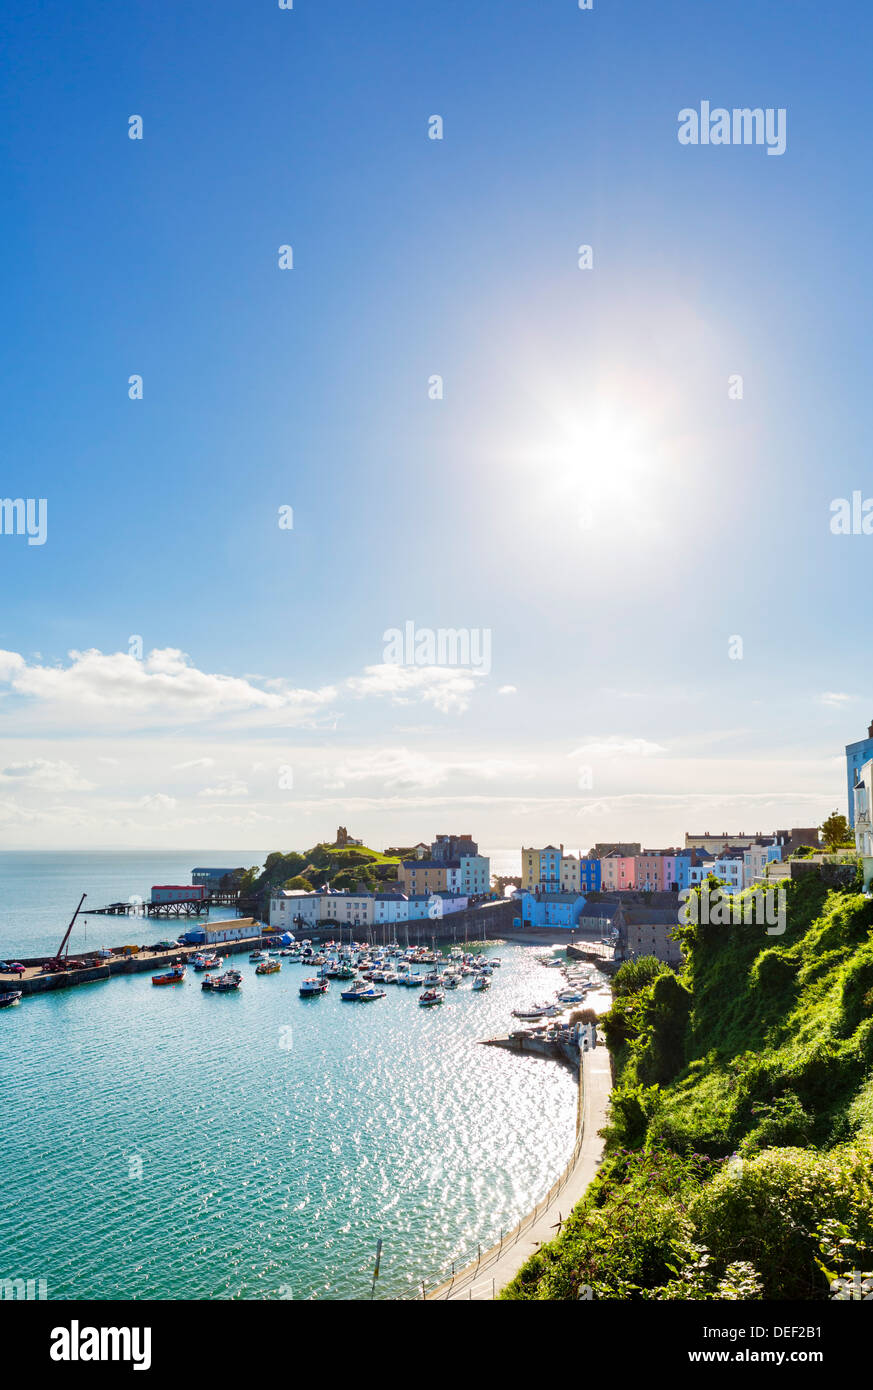 View over the harbour at high tide, Tenby, Carmarthen Bay, Pembrokeshire, Wales, UK Stock Photo